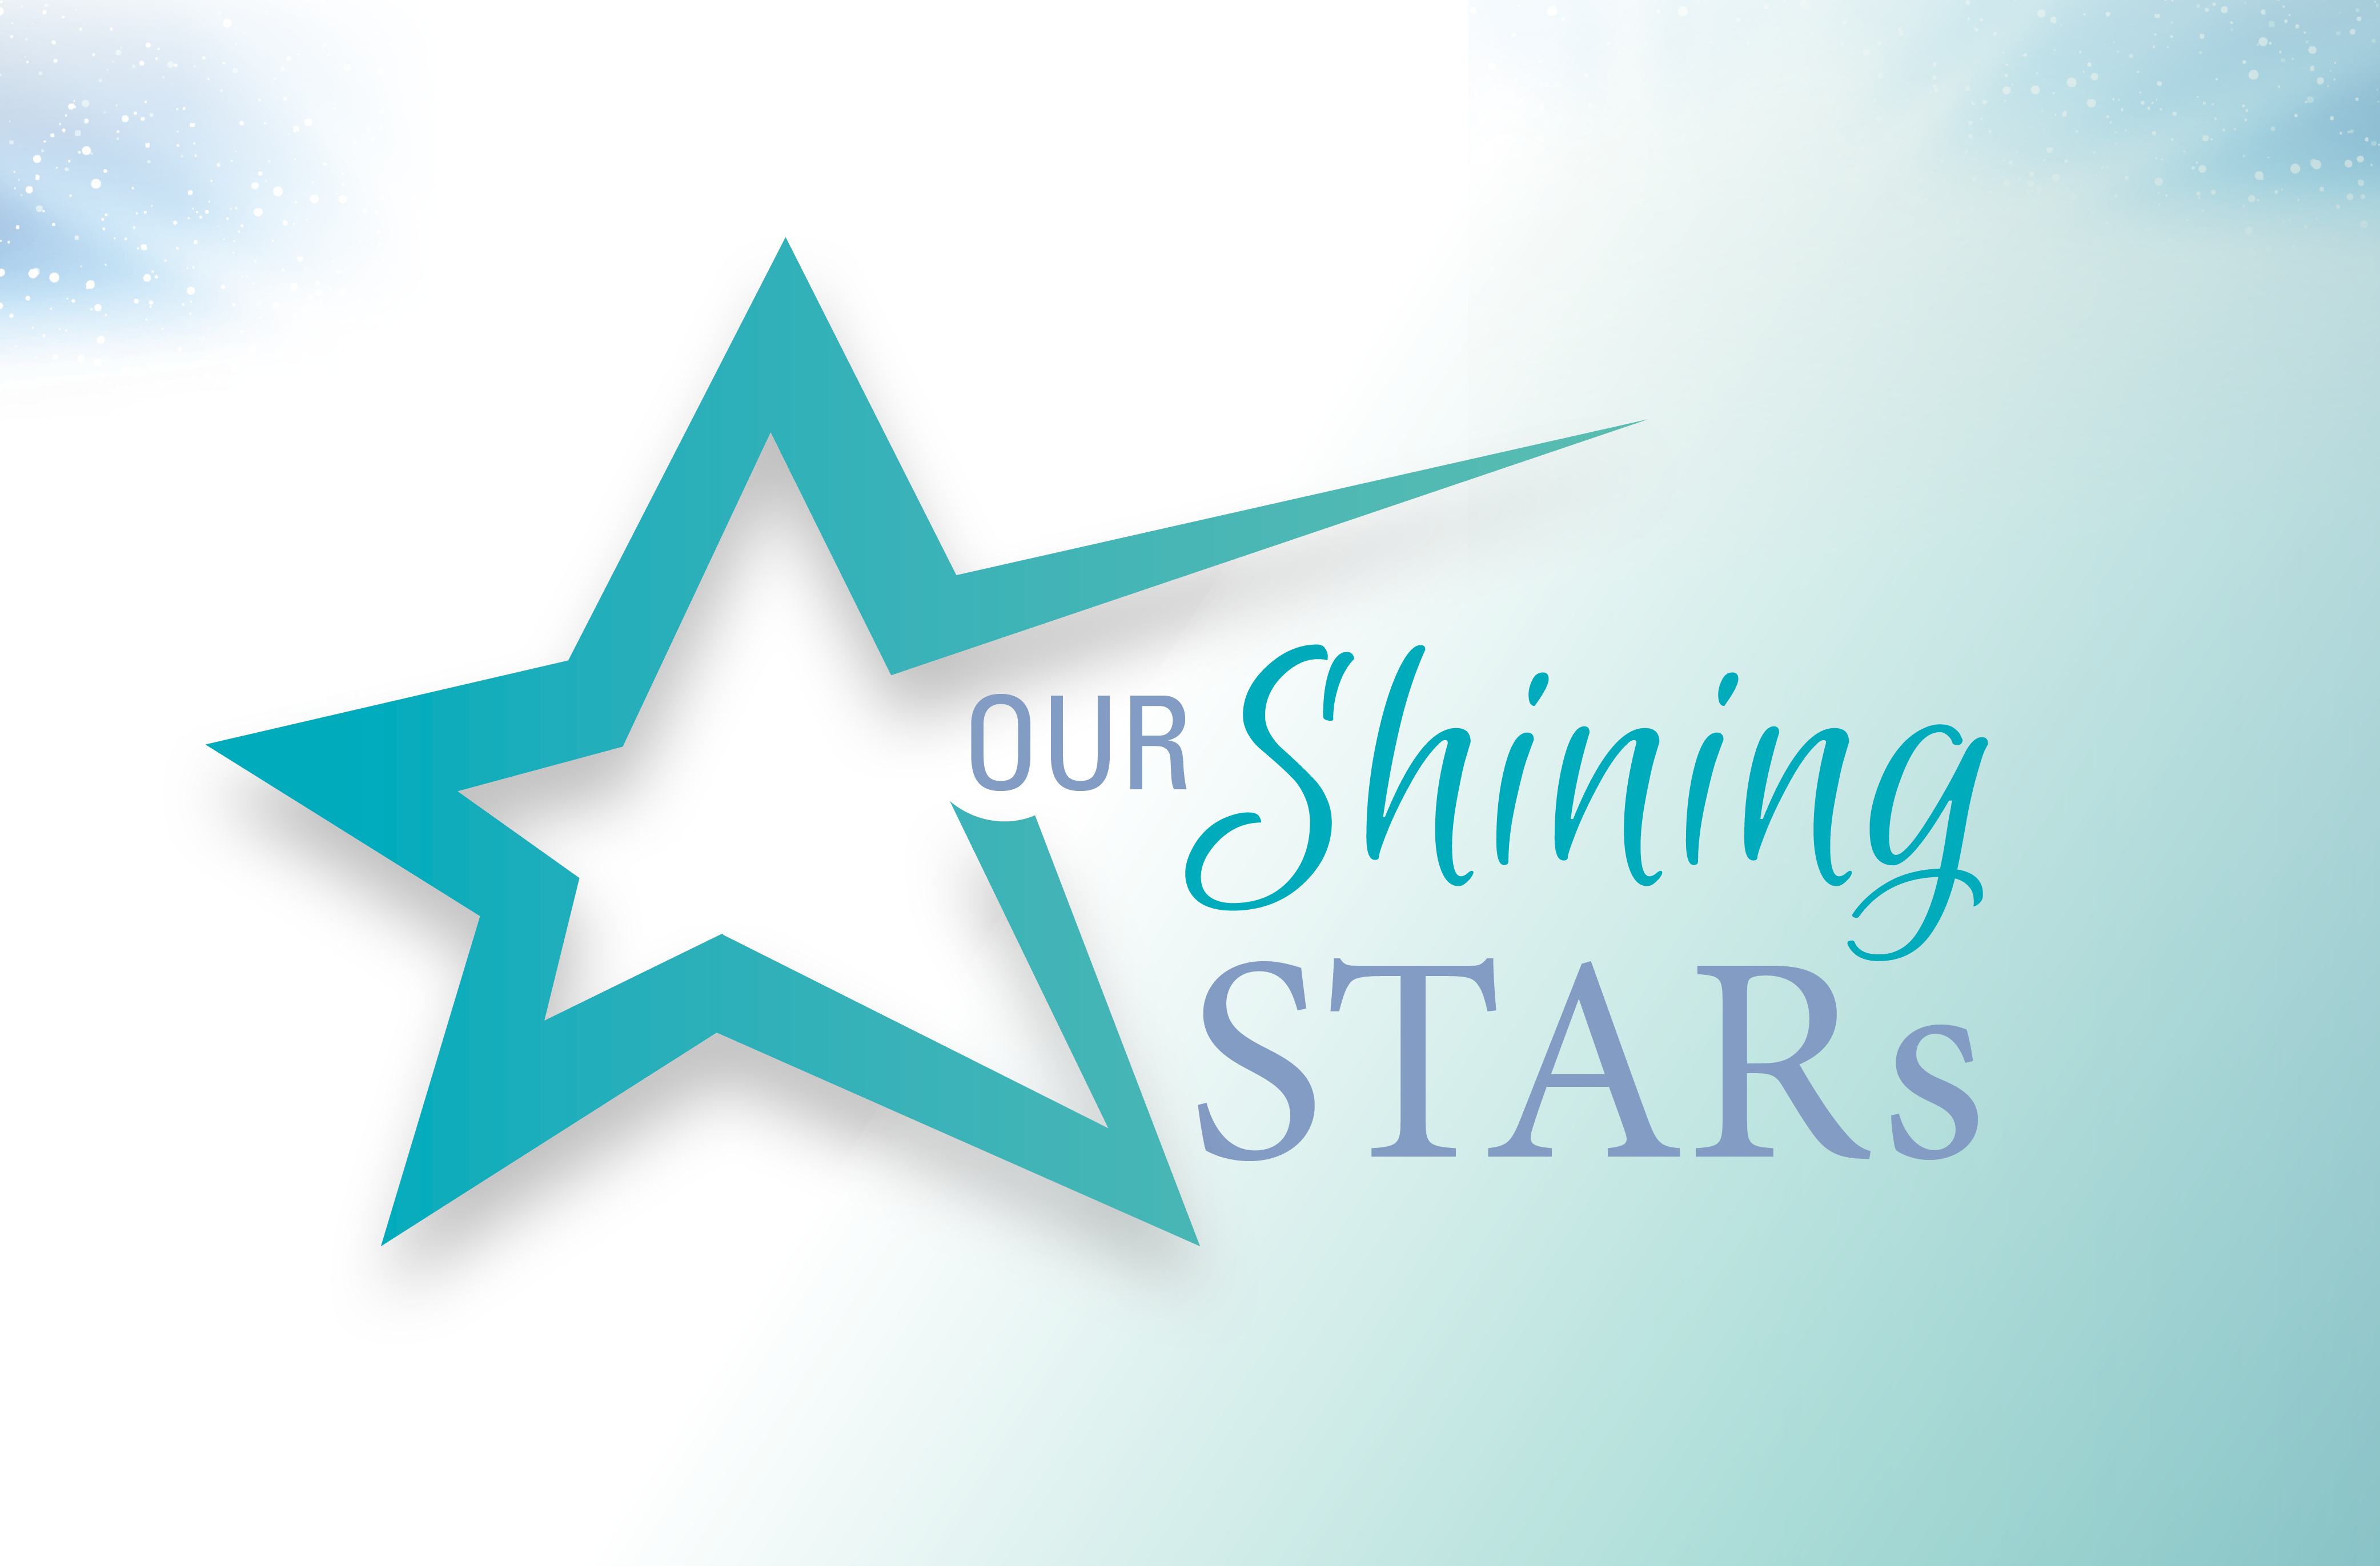 Every month, PPMC staff members who embody Service, Teamwork, Achievement, and Respect earn recognition from their colleagues as Presby STARs.